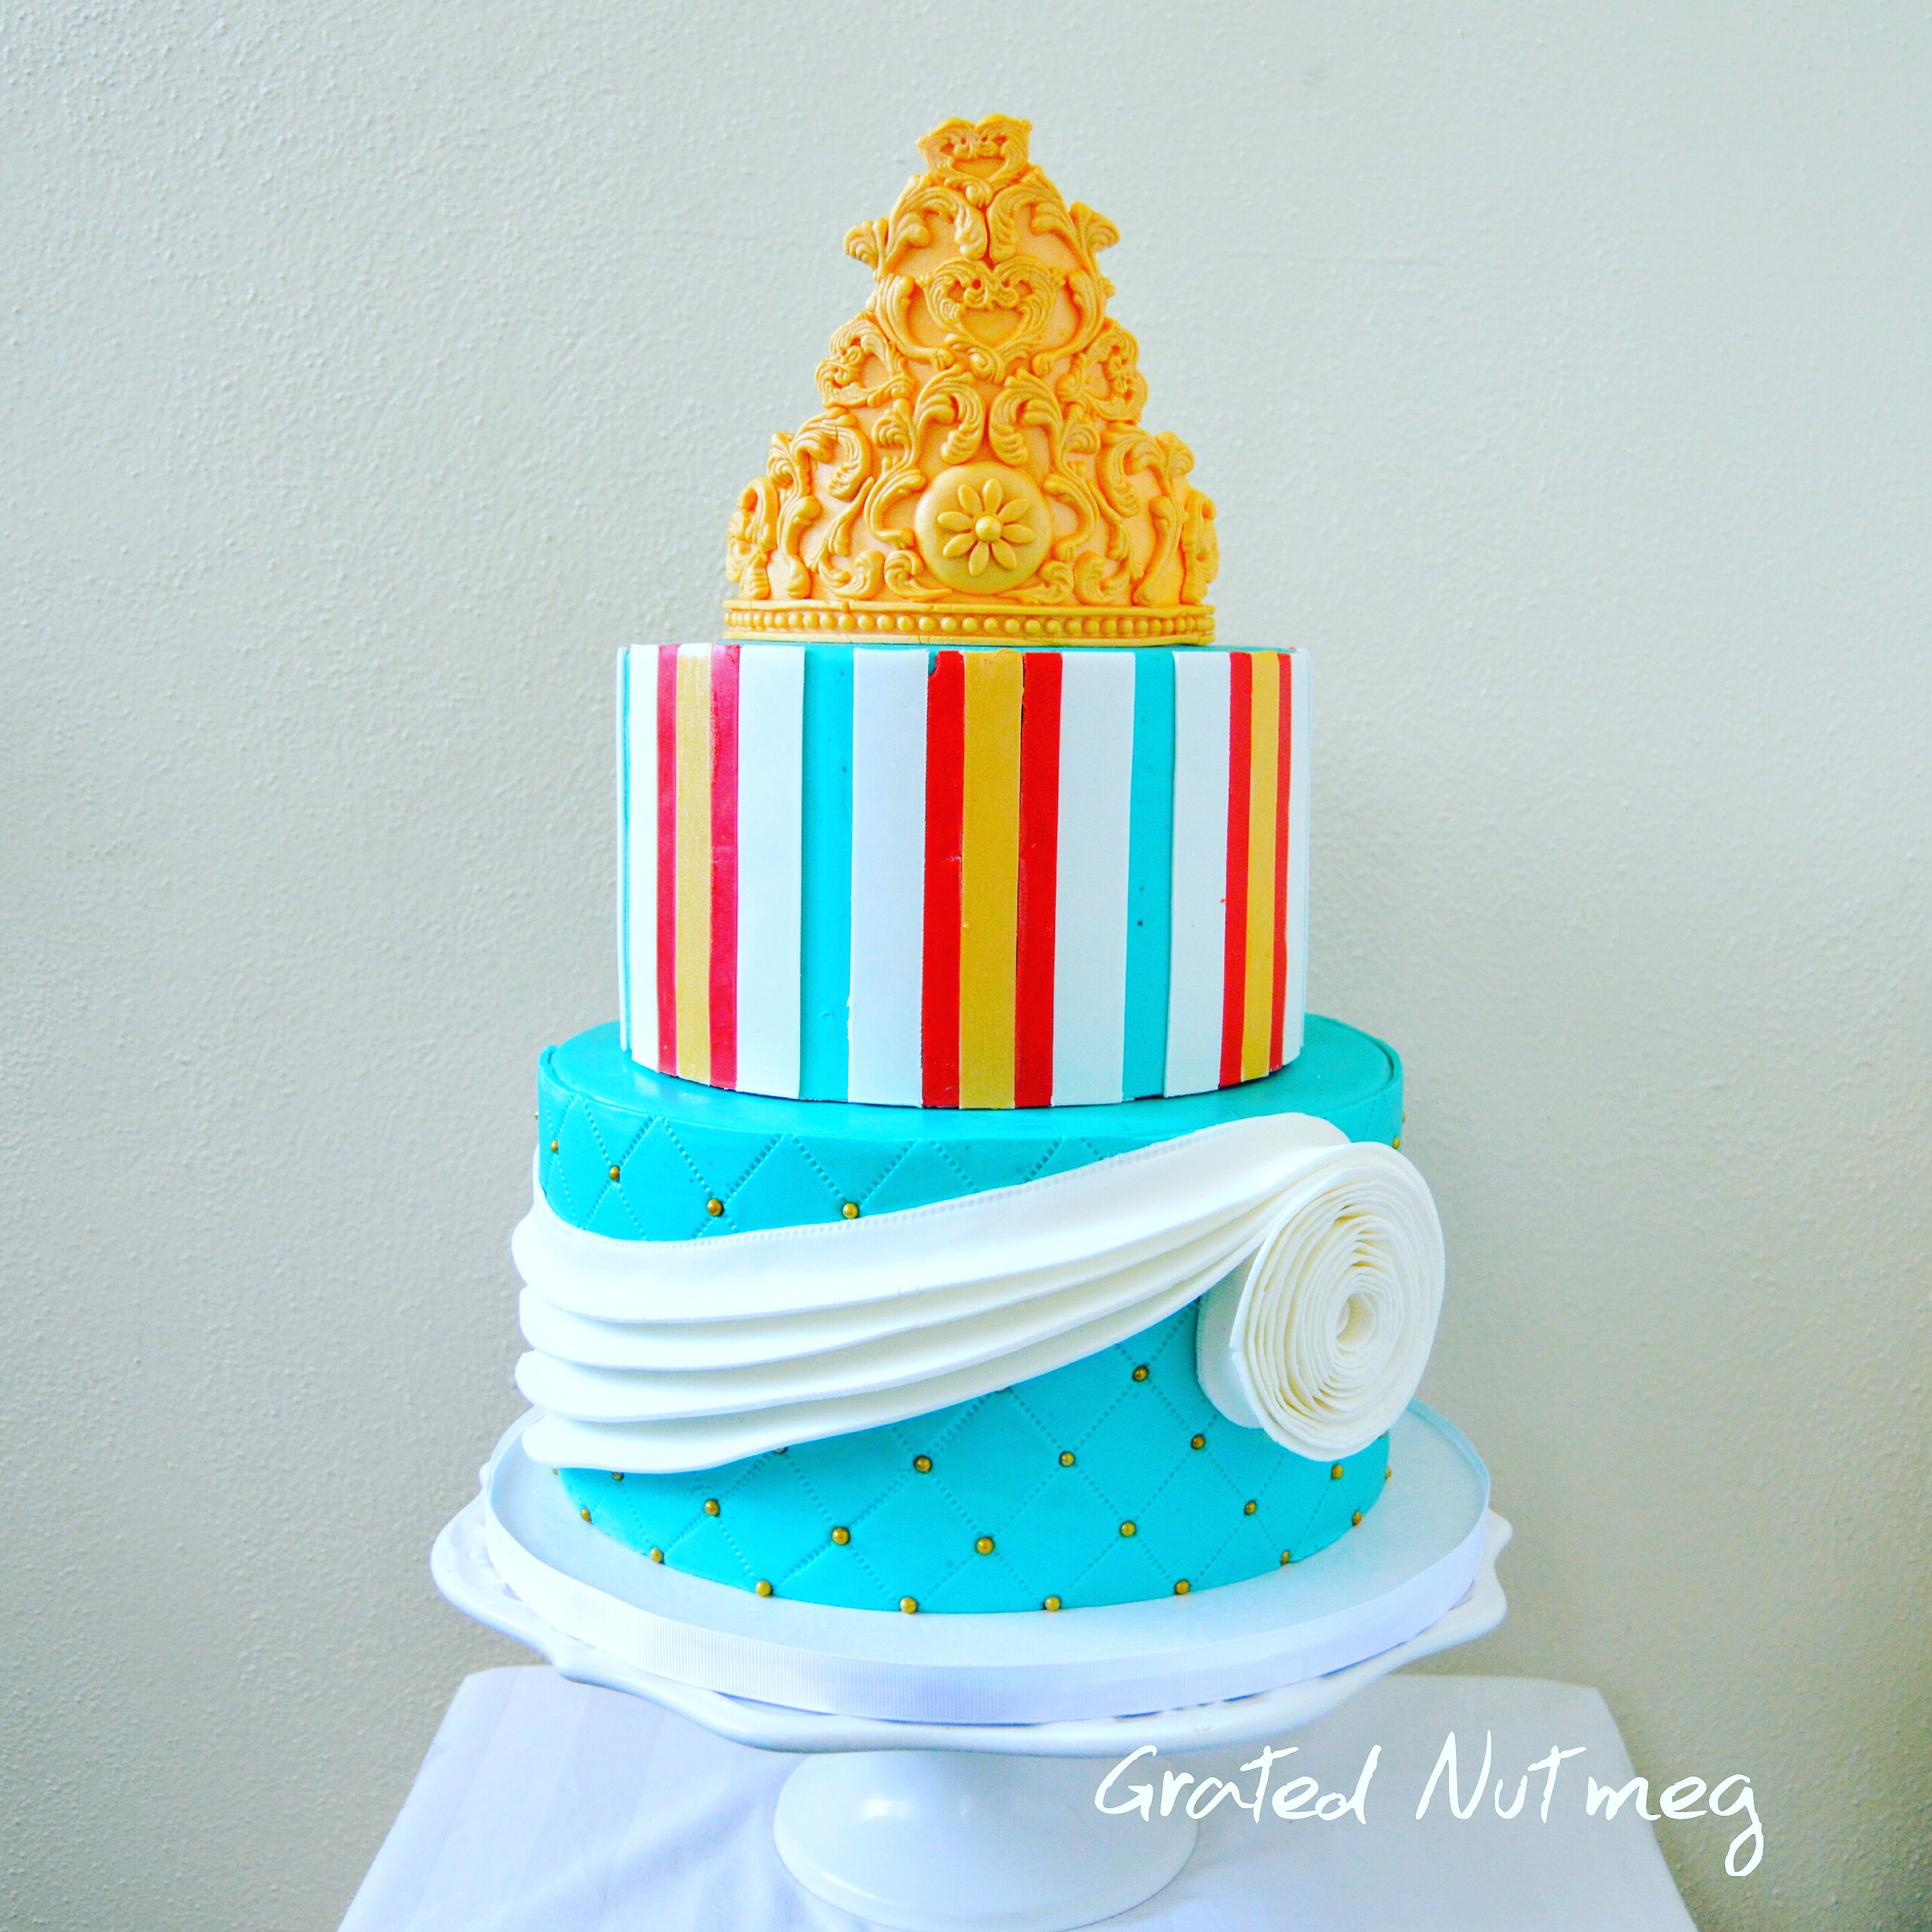 Regal Cake with Extended Swirl Design